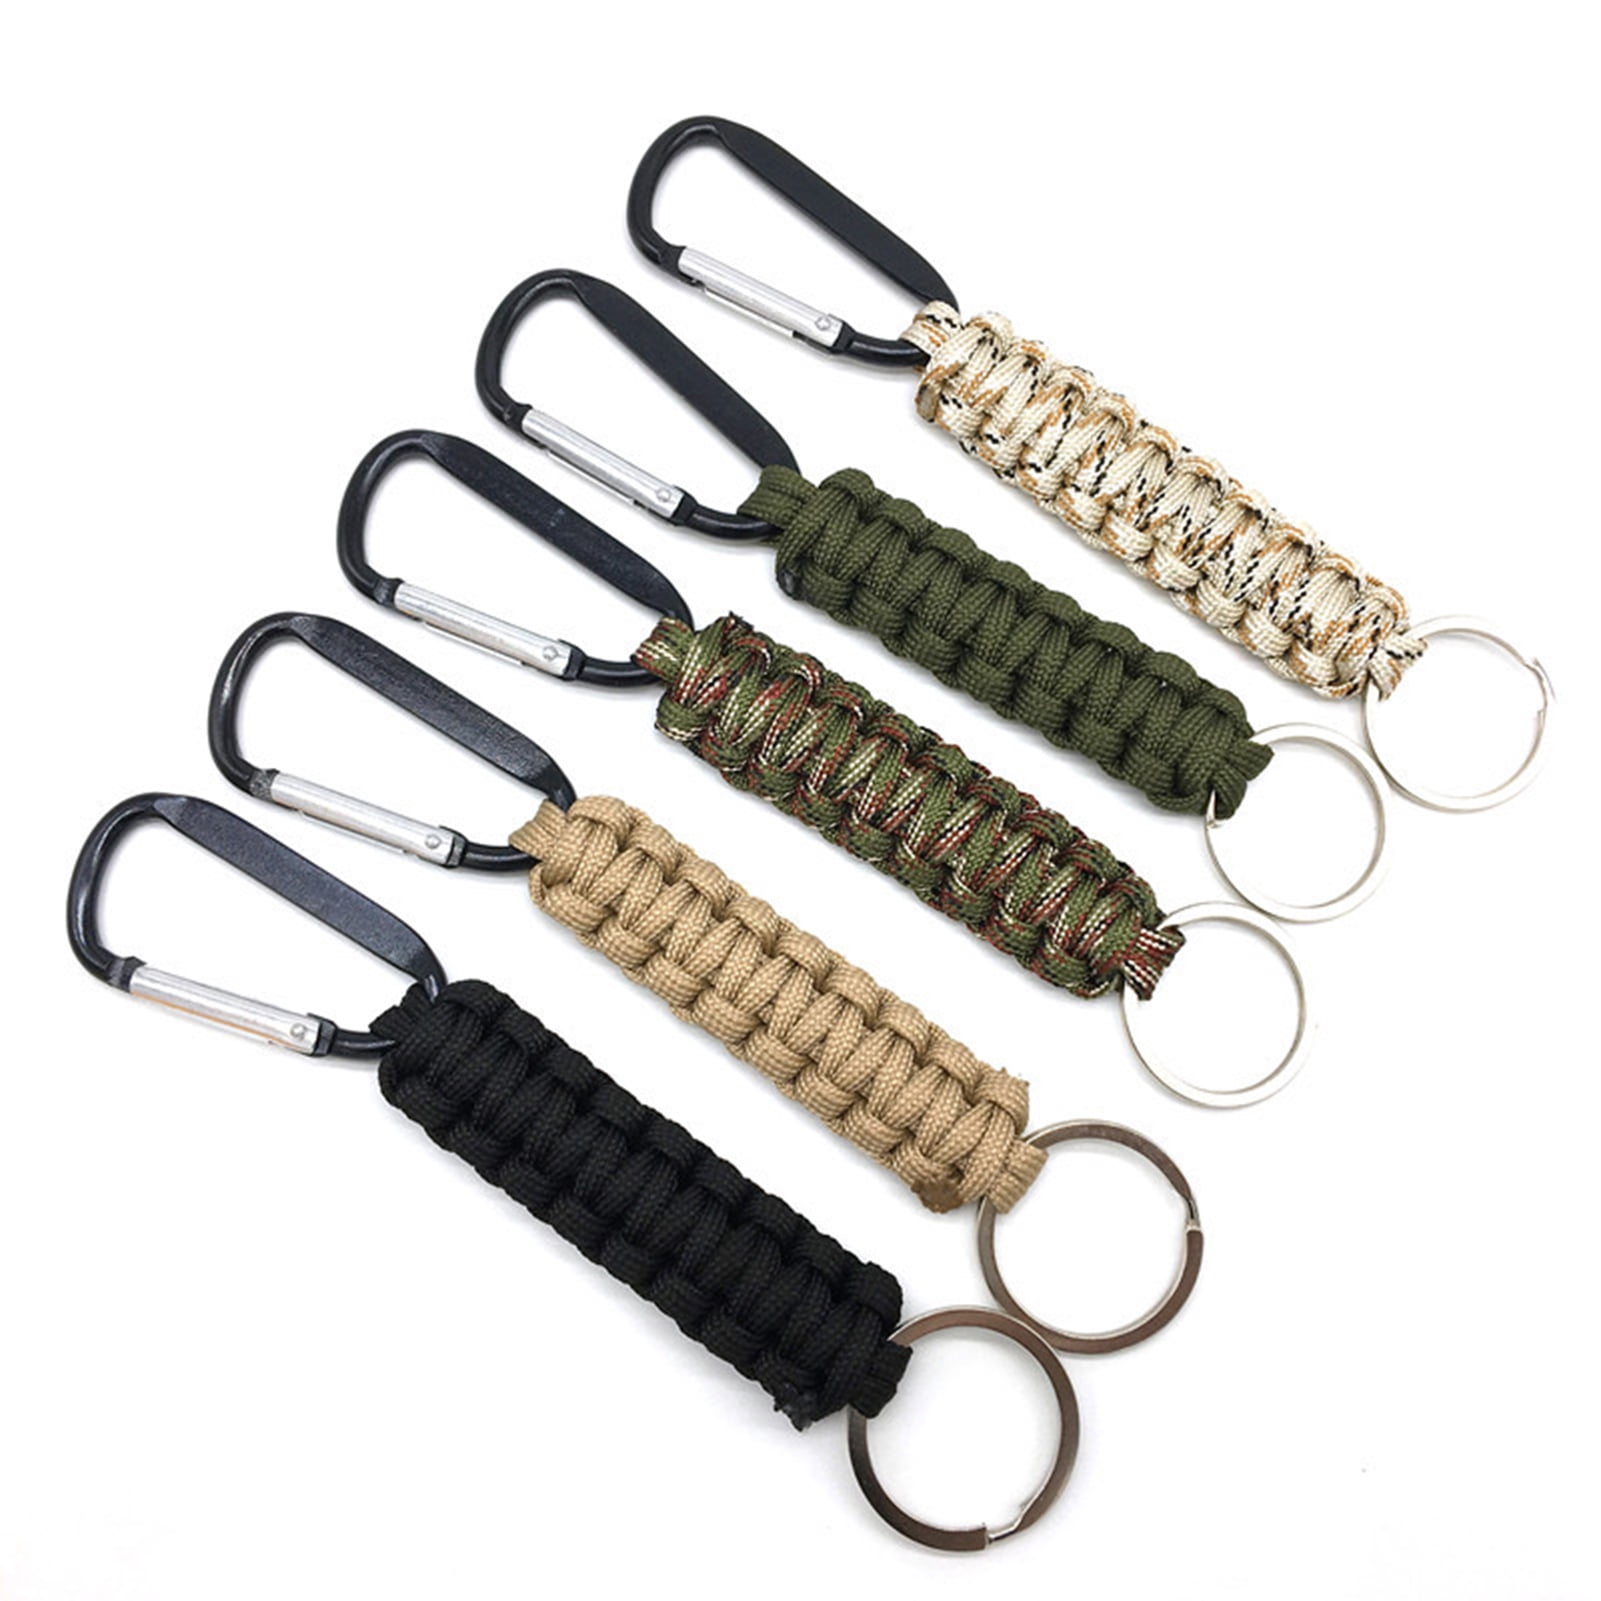 Wind Passion Sturdy Rope Paracord Black Keychain Marine Braided Lanyard Key Chain Ring for Hiking Survival Camping